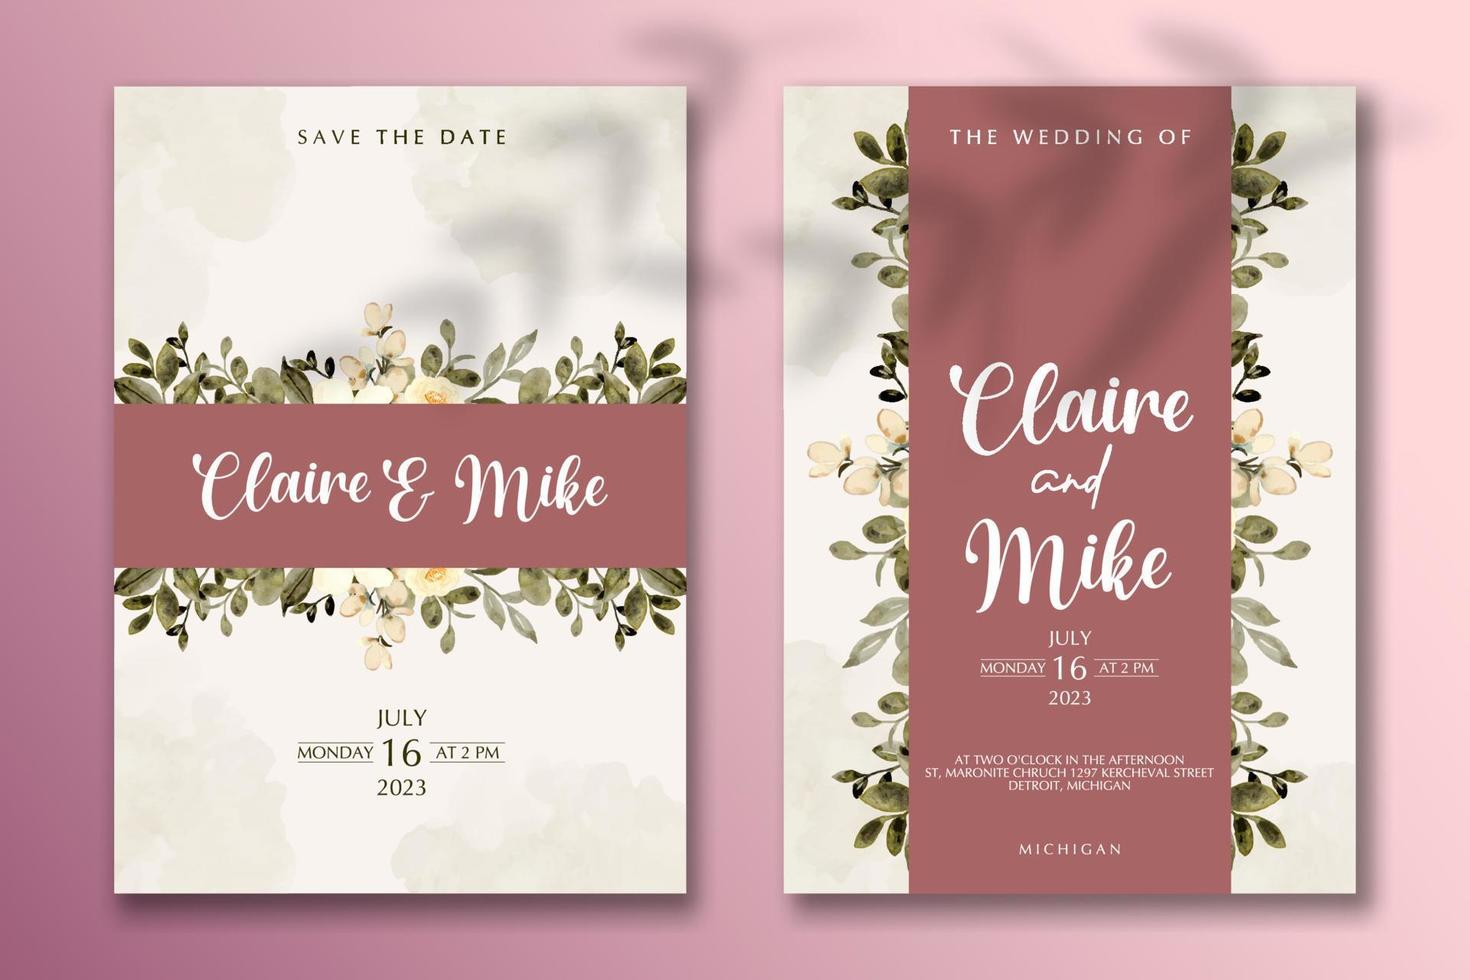 Wedding invitation template with flower vector